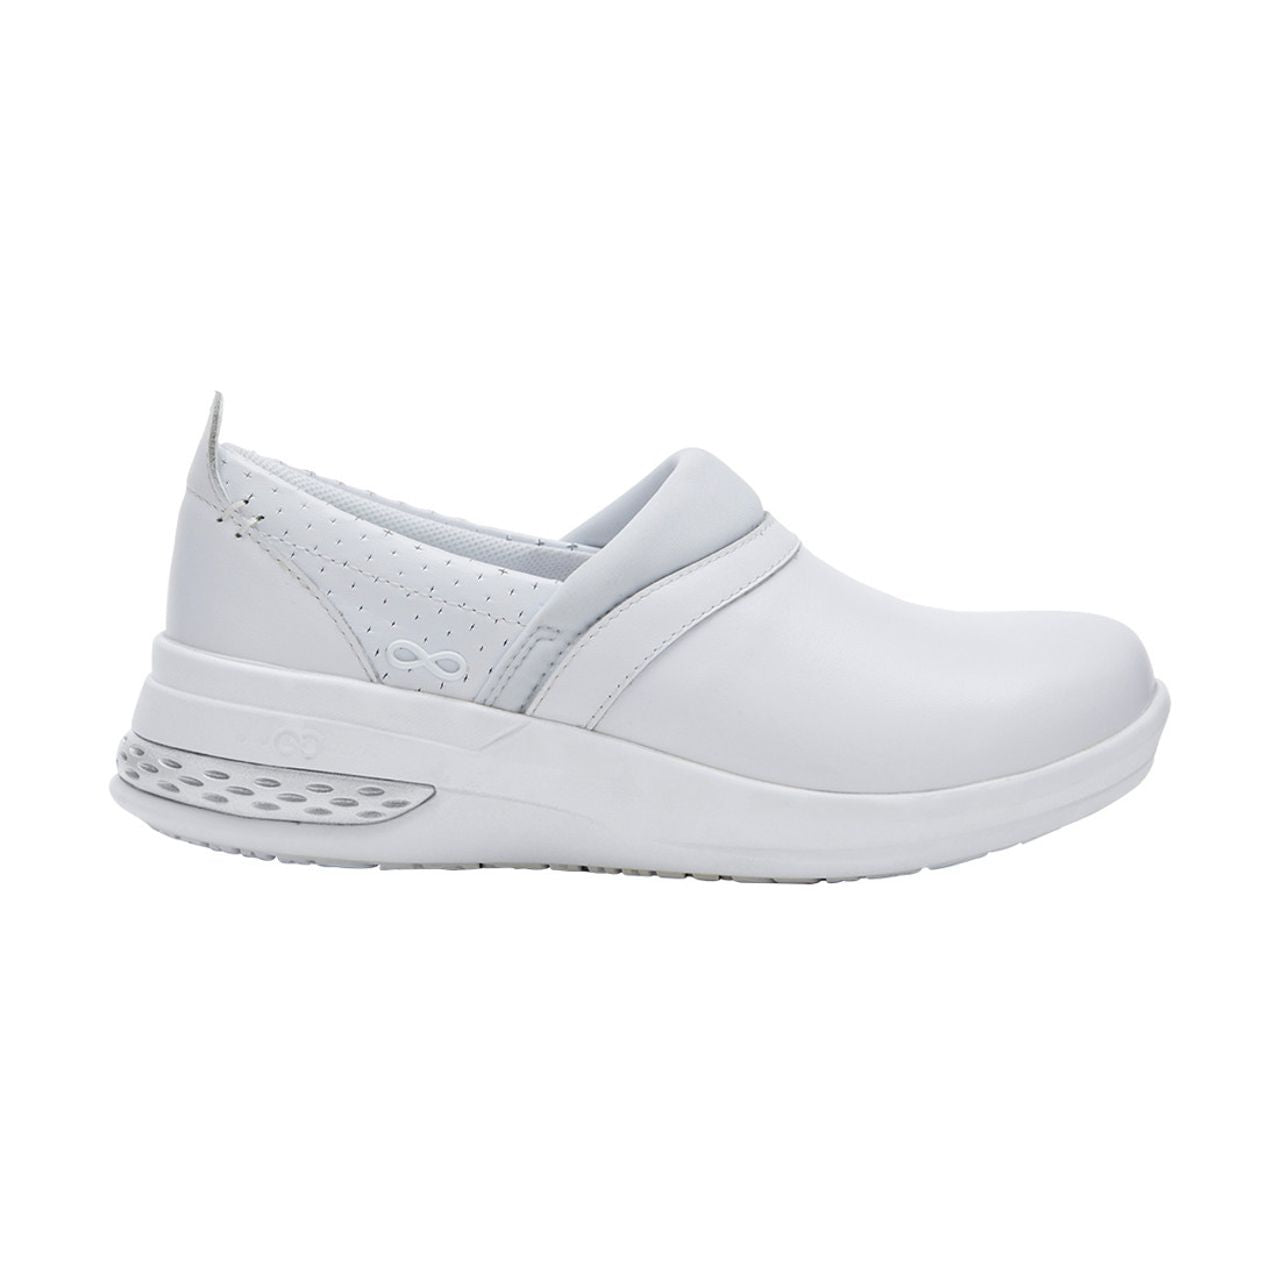 White Color Shift - Cherokee Infinity Footwear STRIDE